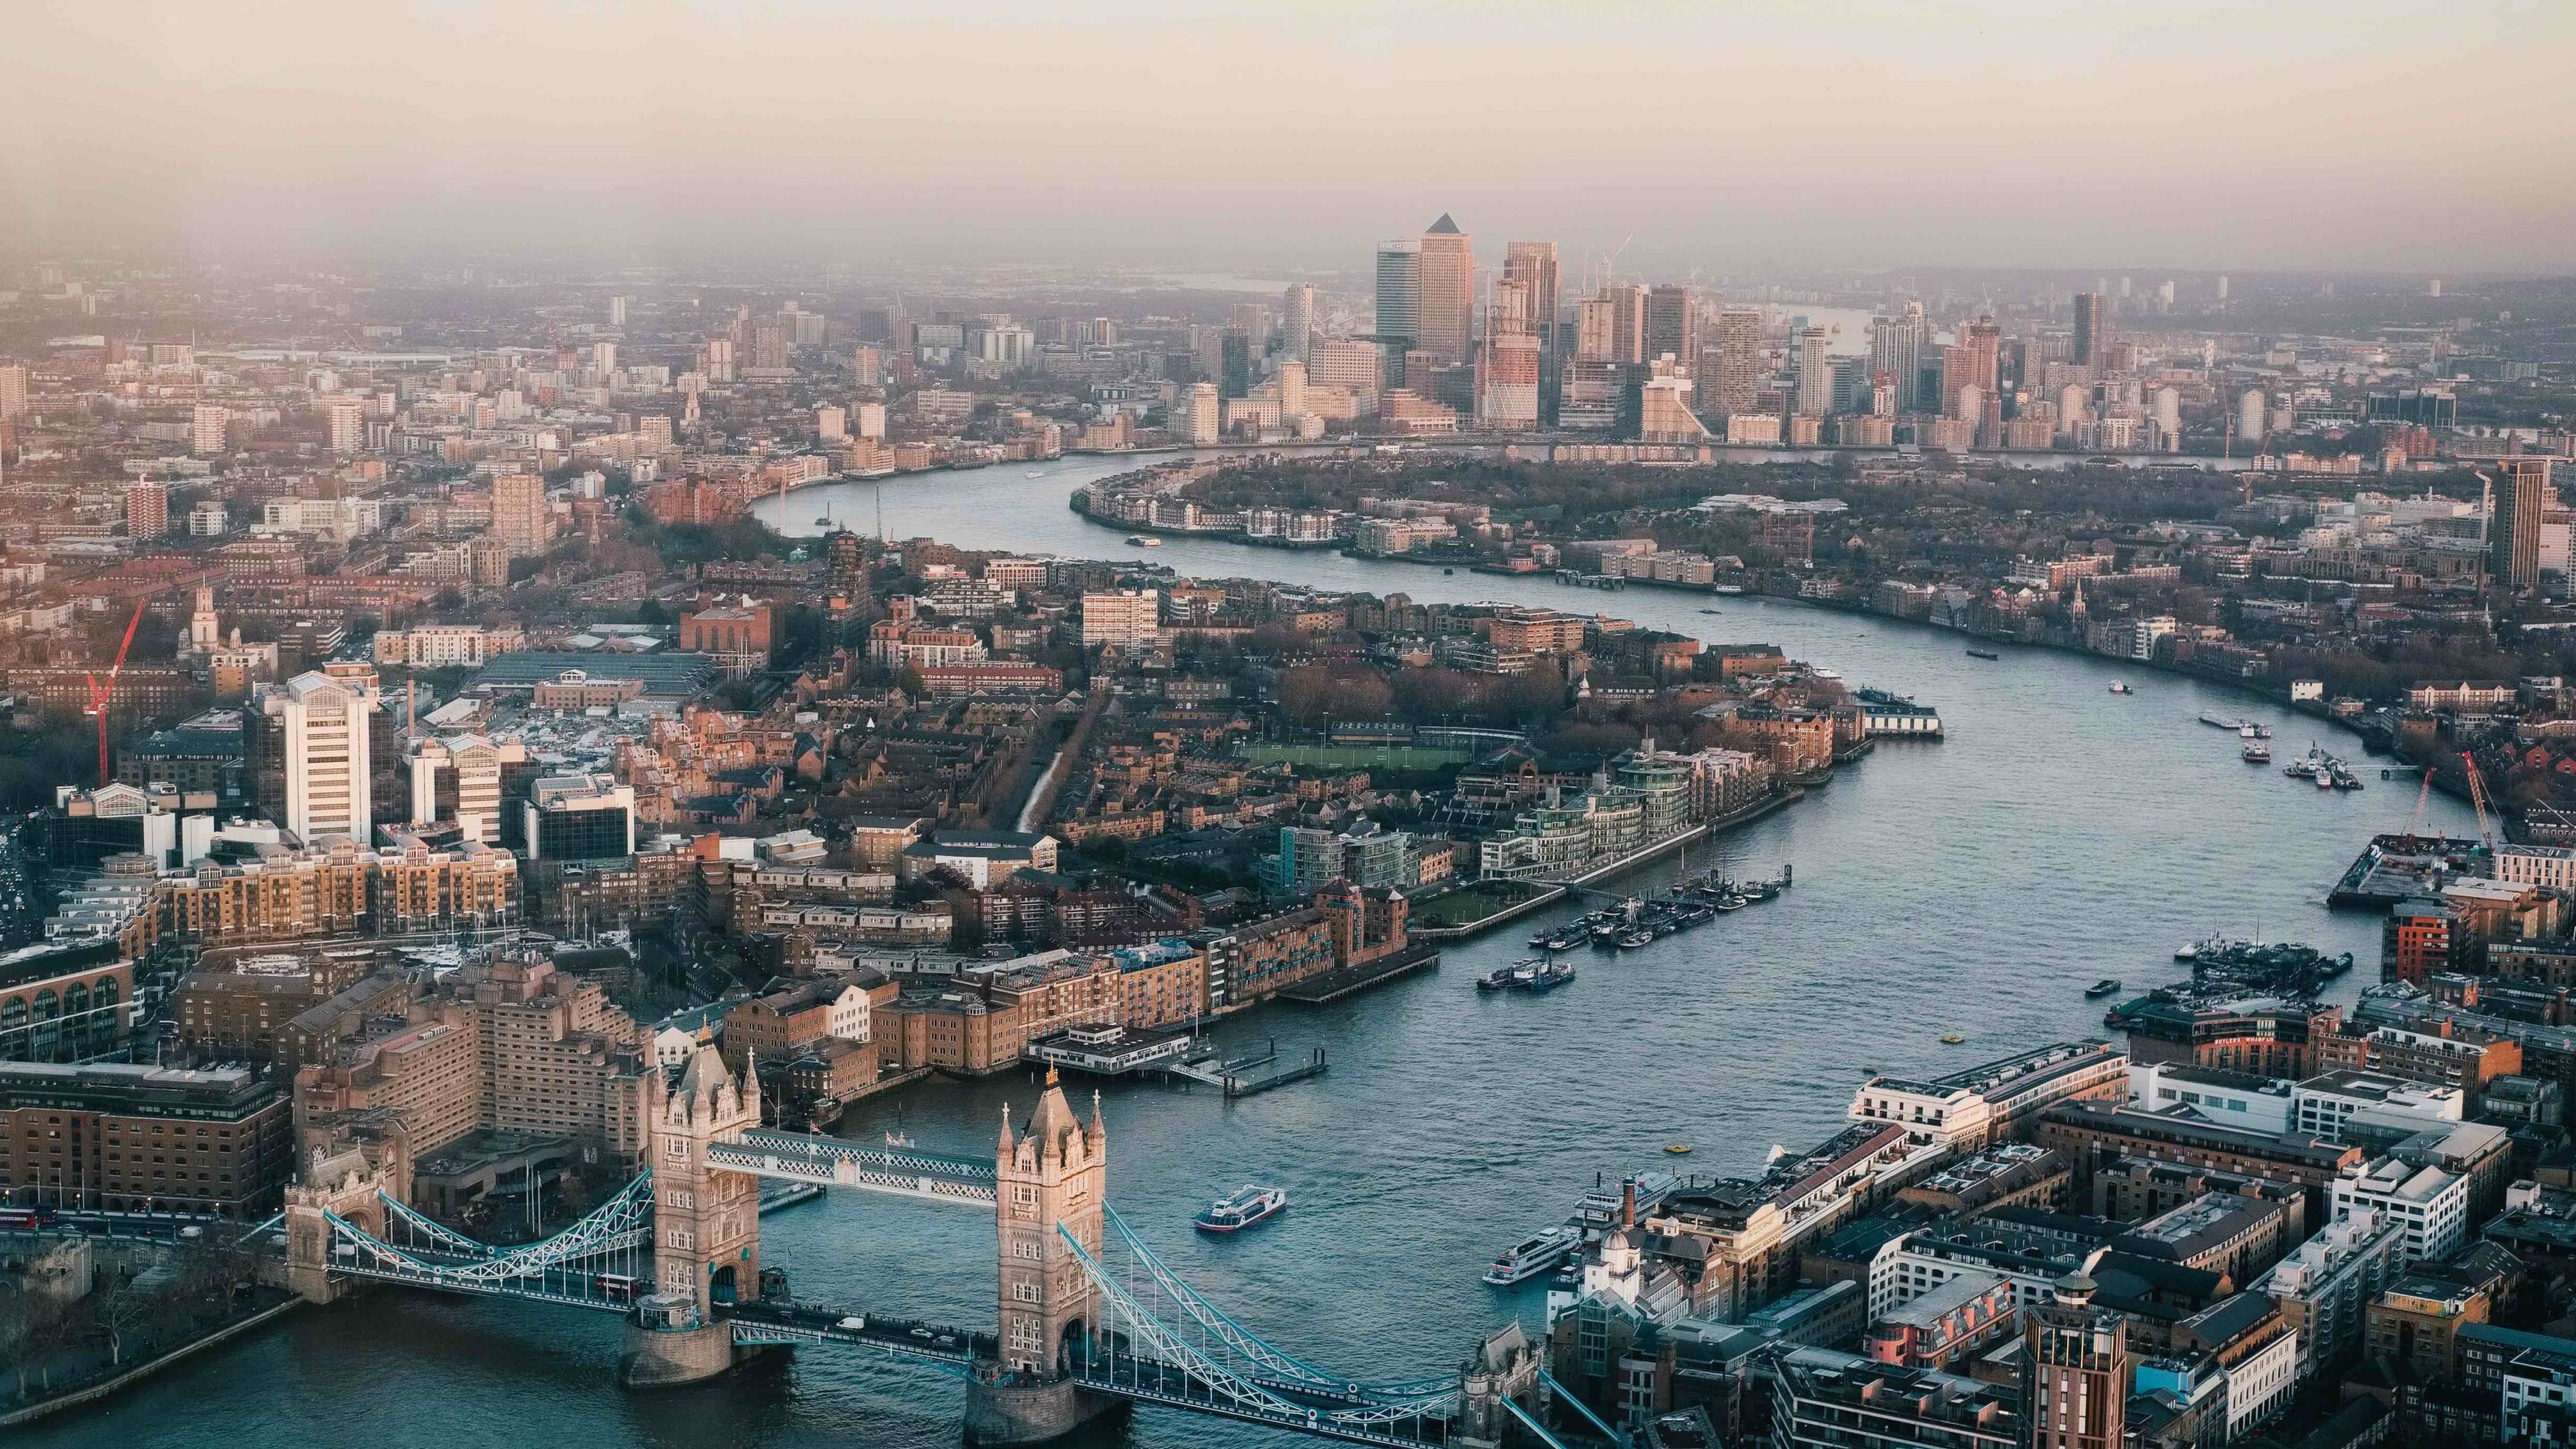 Aerial view of tower bridge in London and the river Thames.